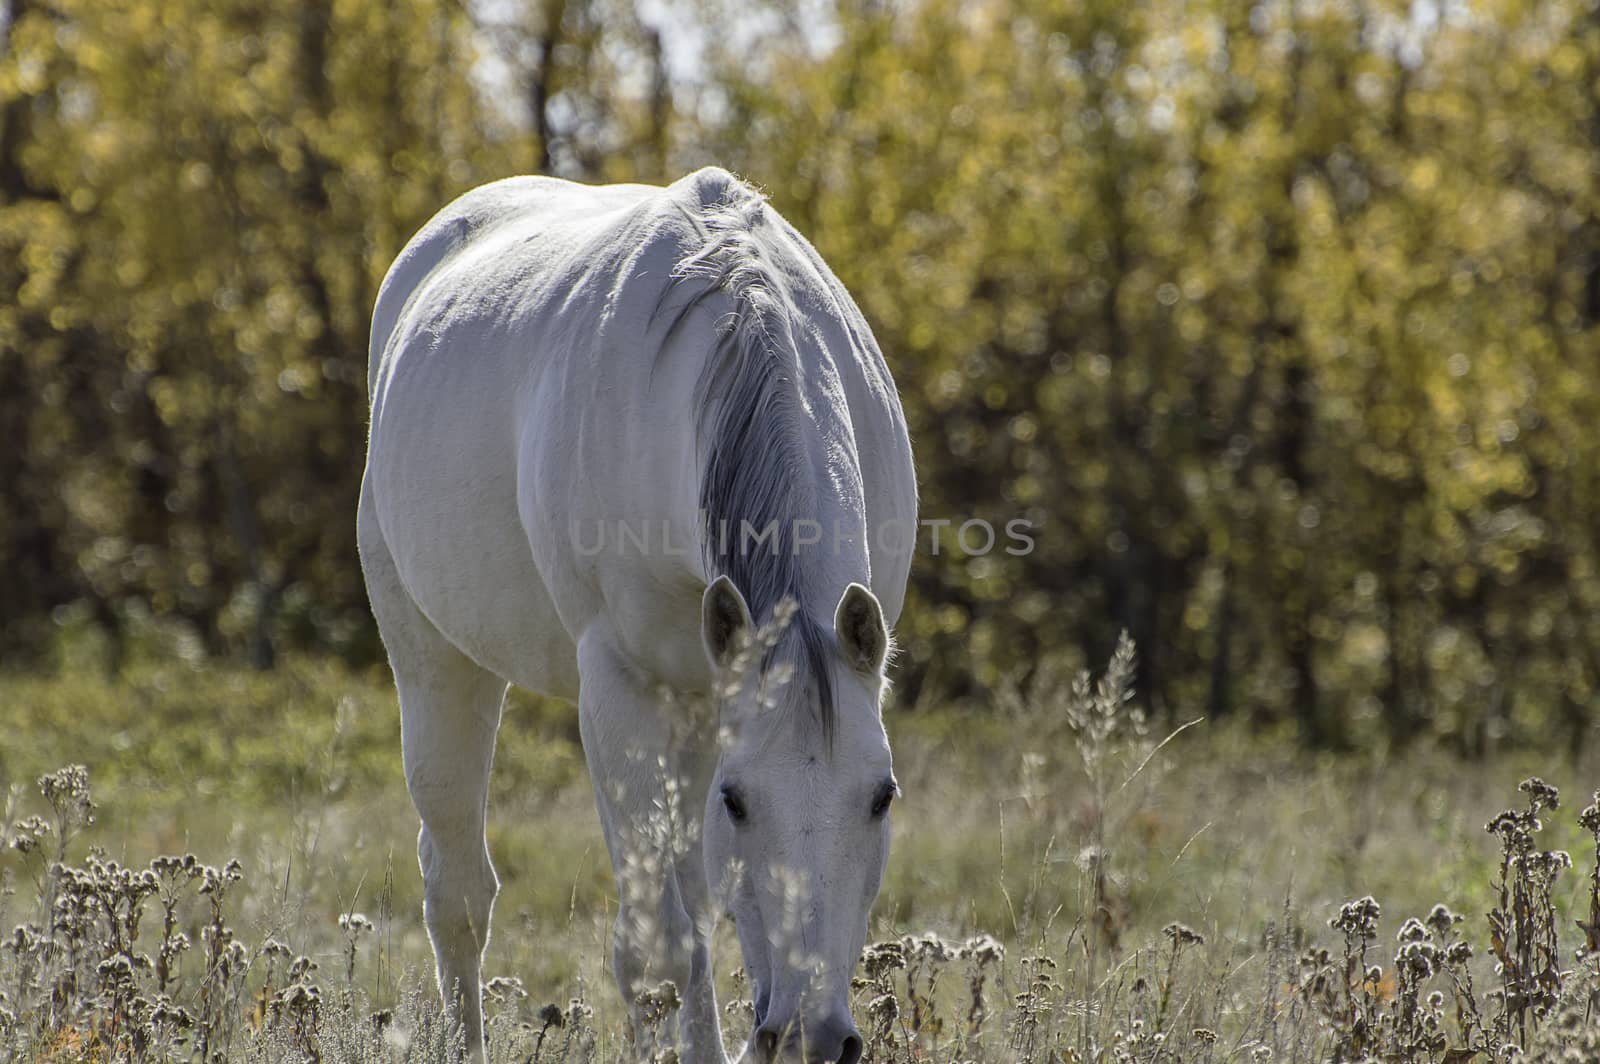 White with gray mane, a beautiful creature. Especially with the orange background provide by autumn.